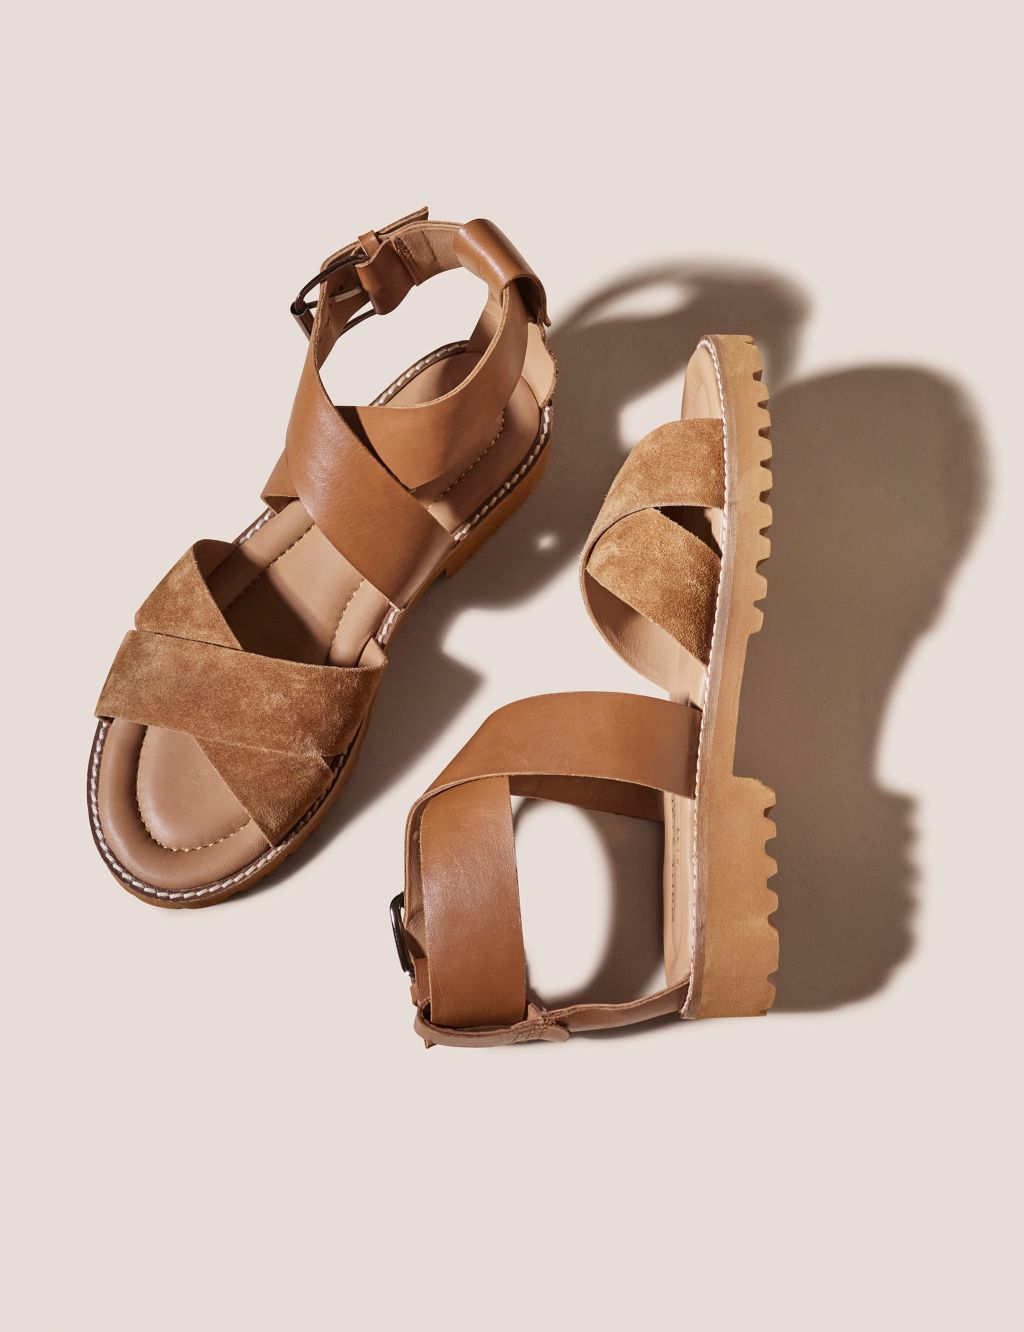 Leather Crossover Ankle Strap Flat Sandals image 3